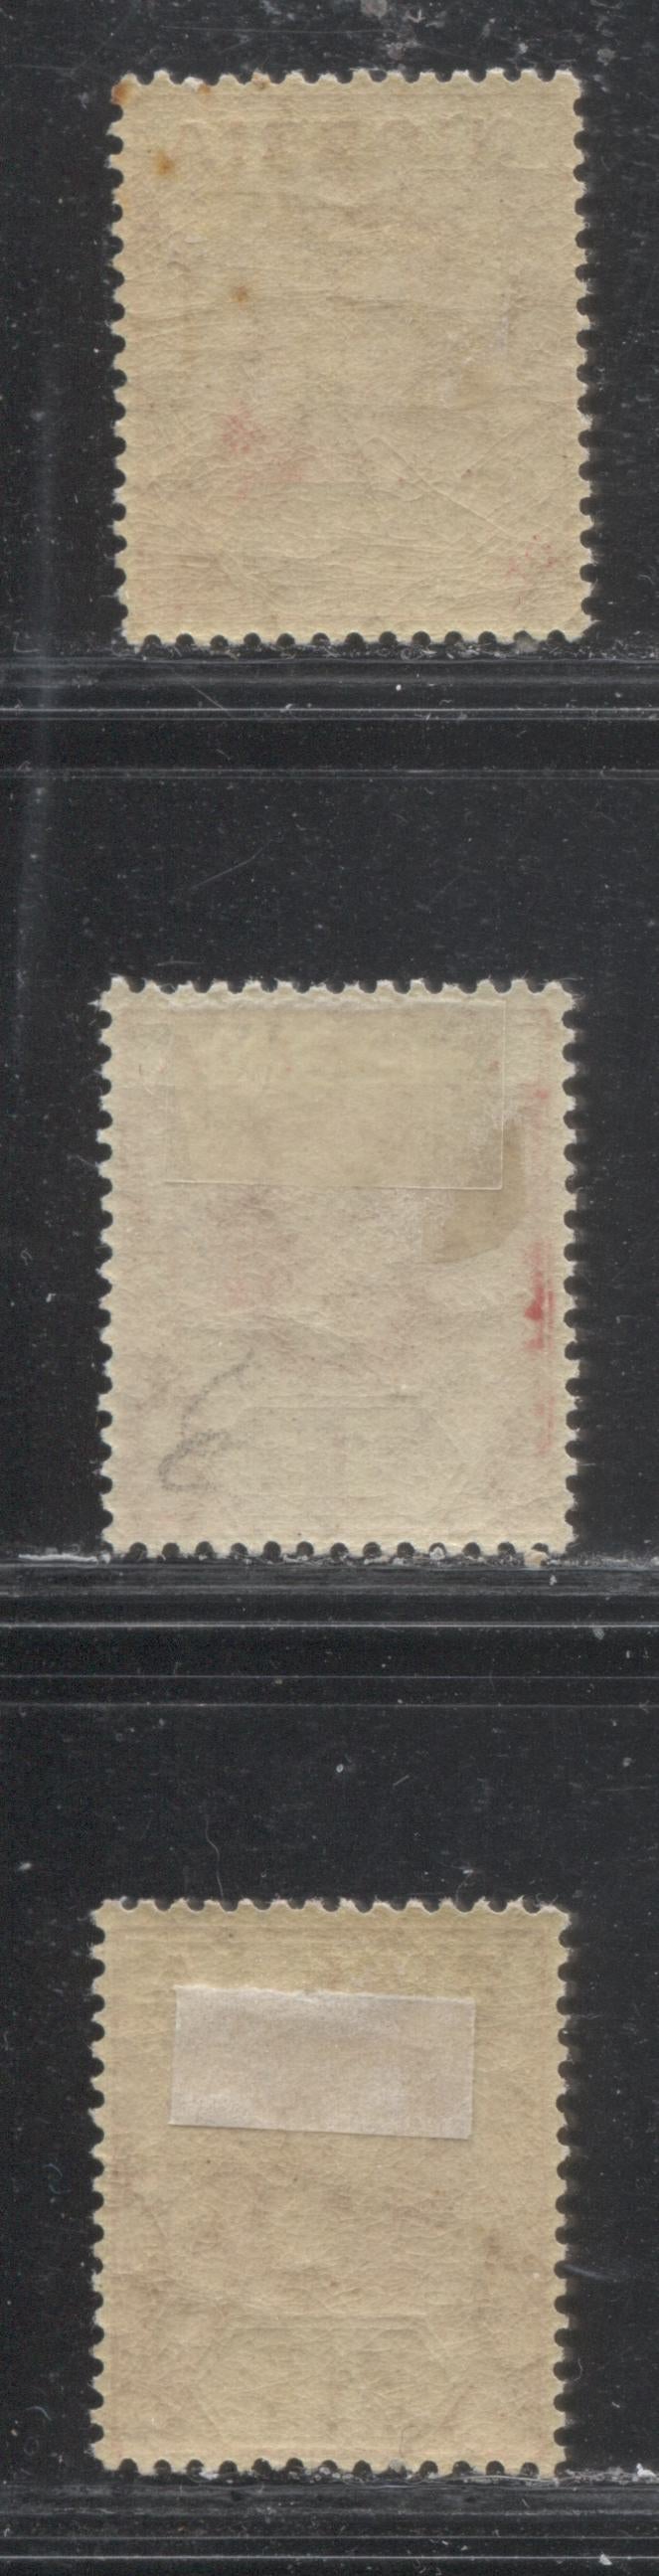 Lot 170 Nigeria SG# 2 1d Carmine Red King George V, 1914-1921 Multiple Crown CA Imperium Keyplate Issue, Three VFOG Examples, From Different Printings, Each a Slightly Different Shade